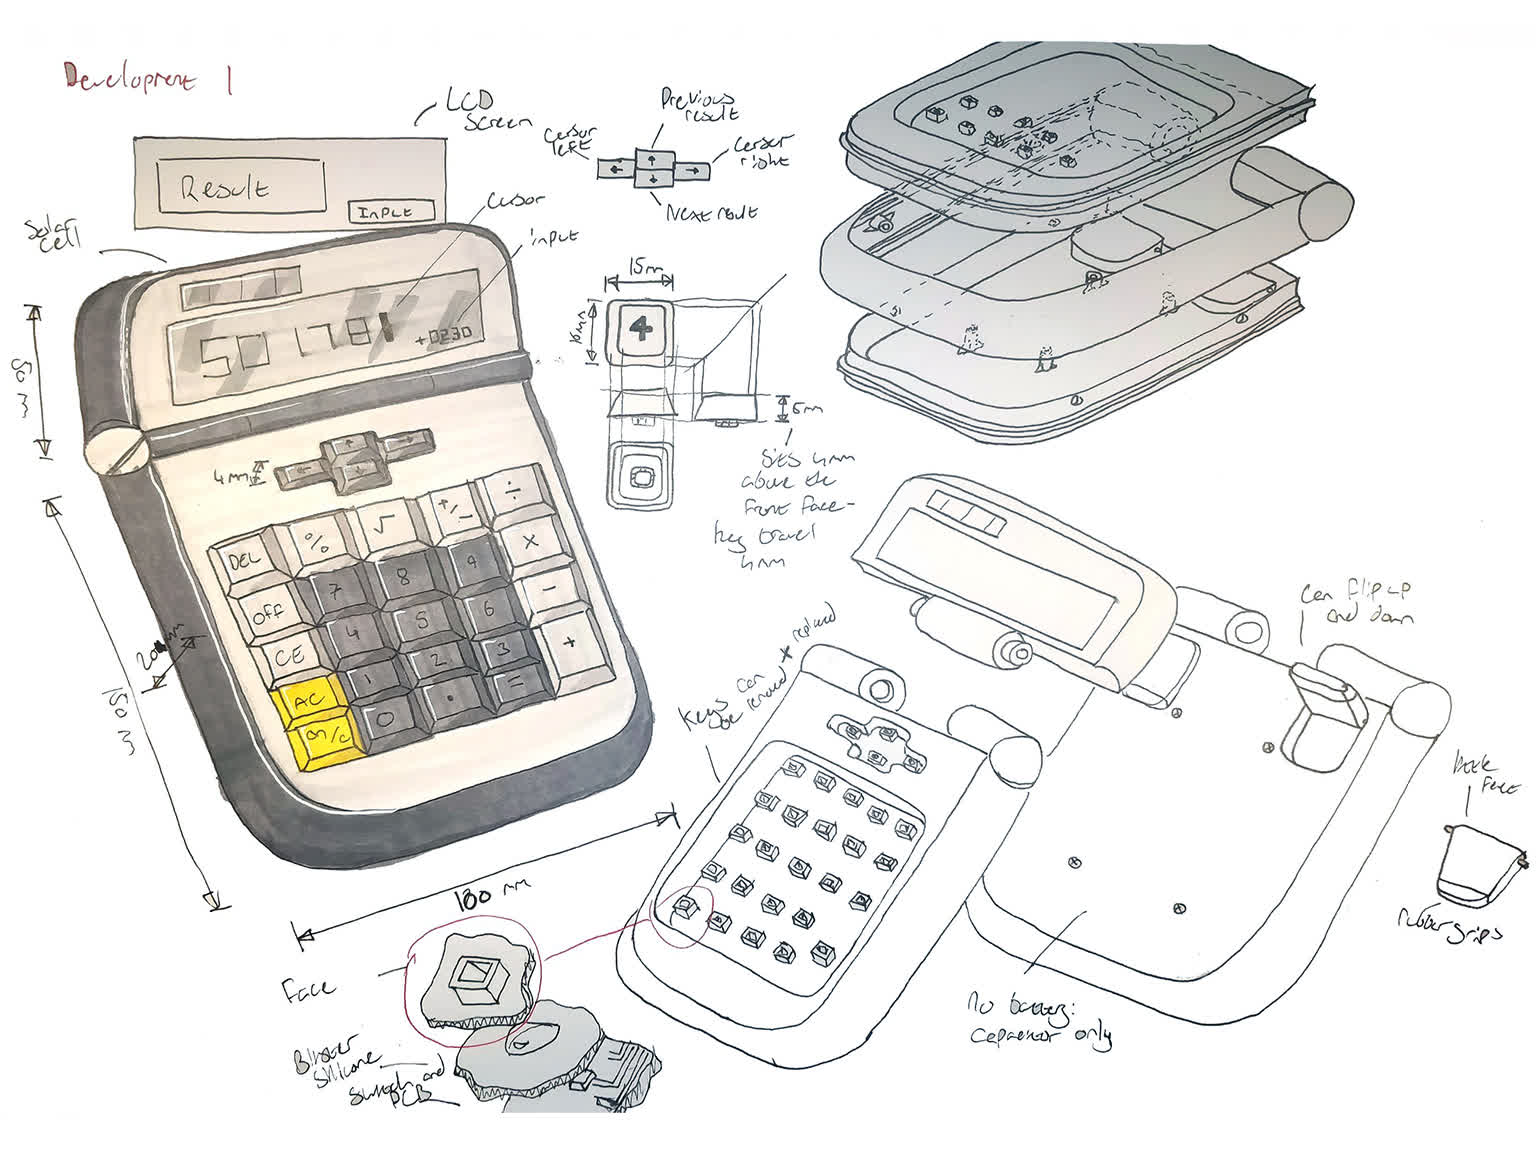 sketches of a design for a calculator based on the market one